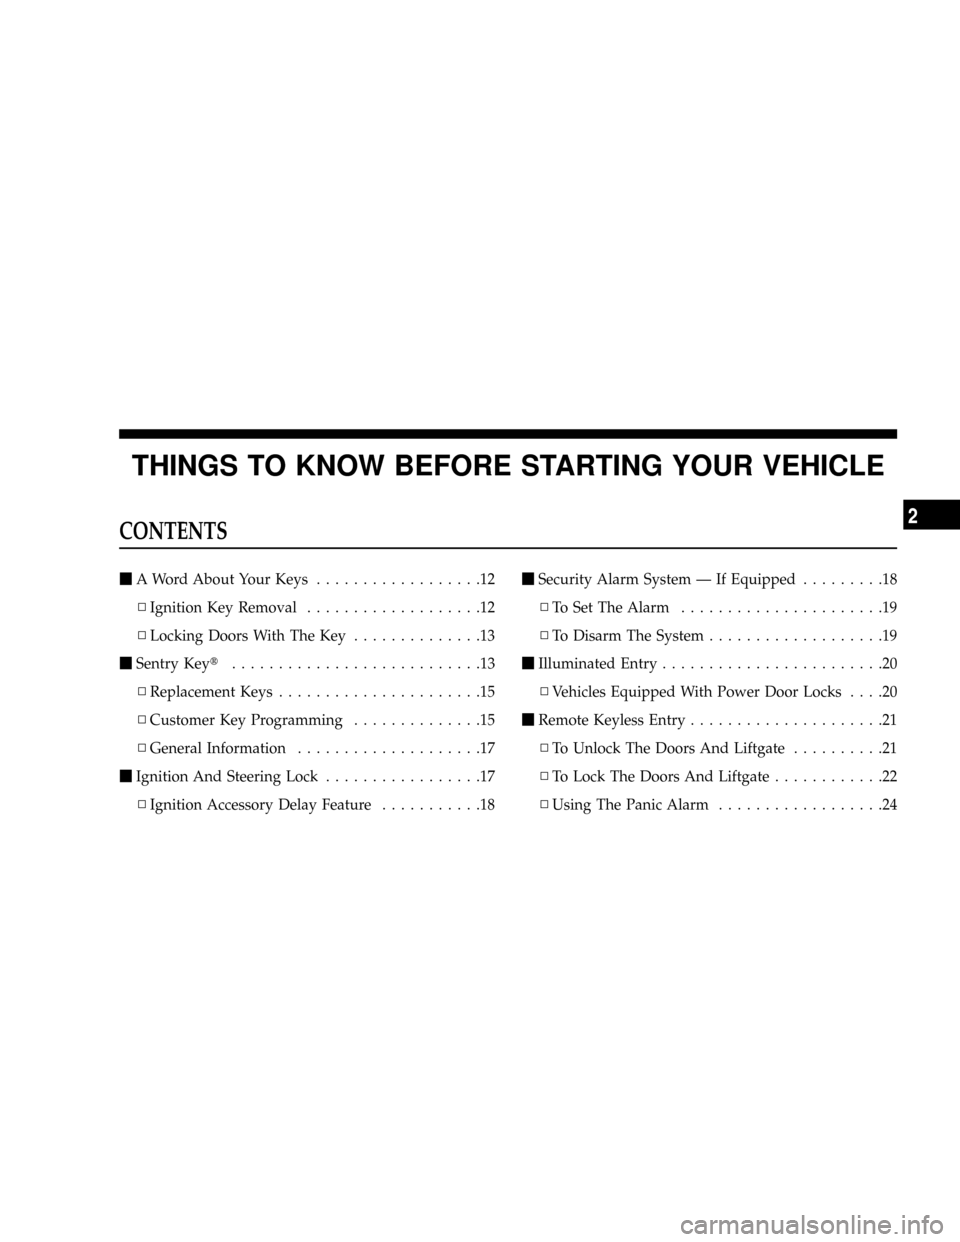 CHRYSLER ASPEN 2008 2.G Owners Manual THINGS TO KNOW BEFORE STARTING YOUR VEHICLE
CONTENTS
mA Word About Your Keys..................12
NIgnition Key Removal...................12
NLocking Doors With The Key..............13
mSentry Keyt....